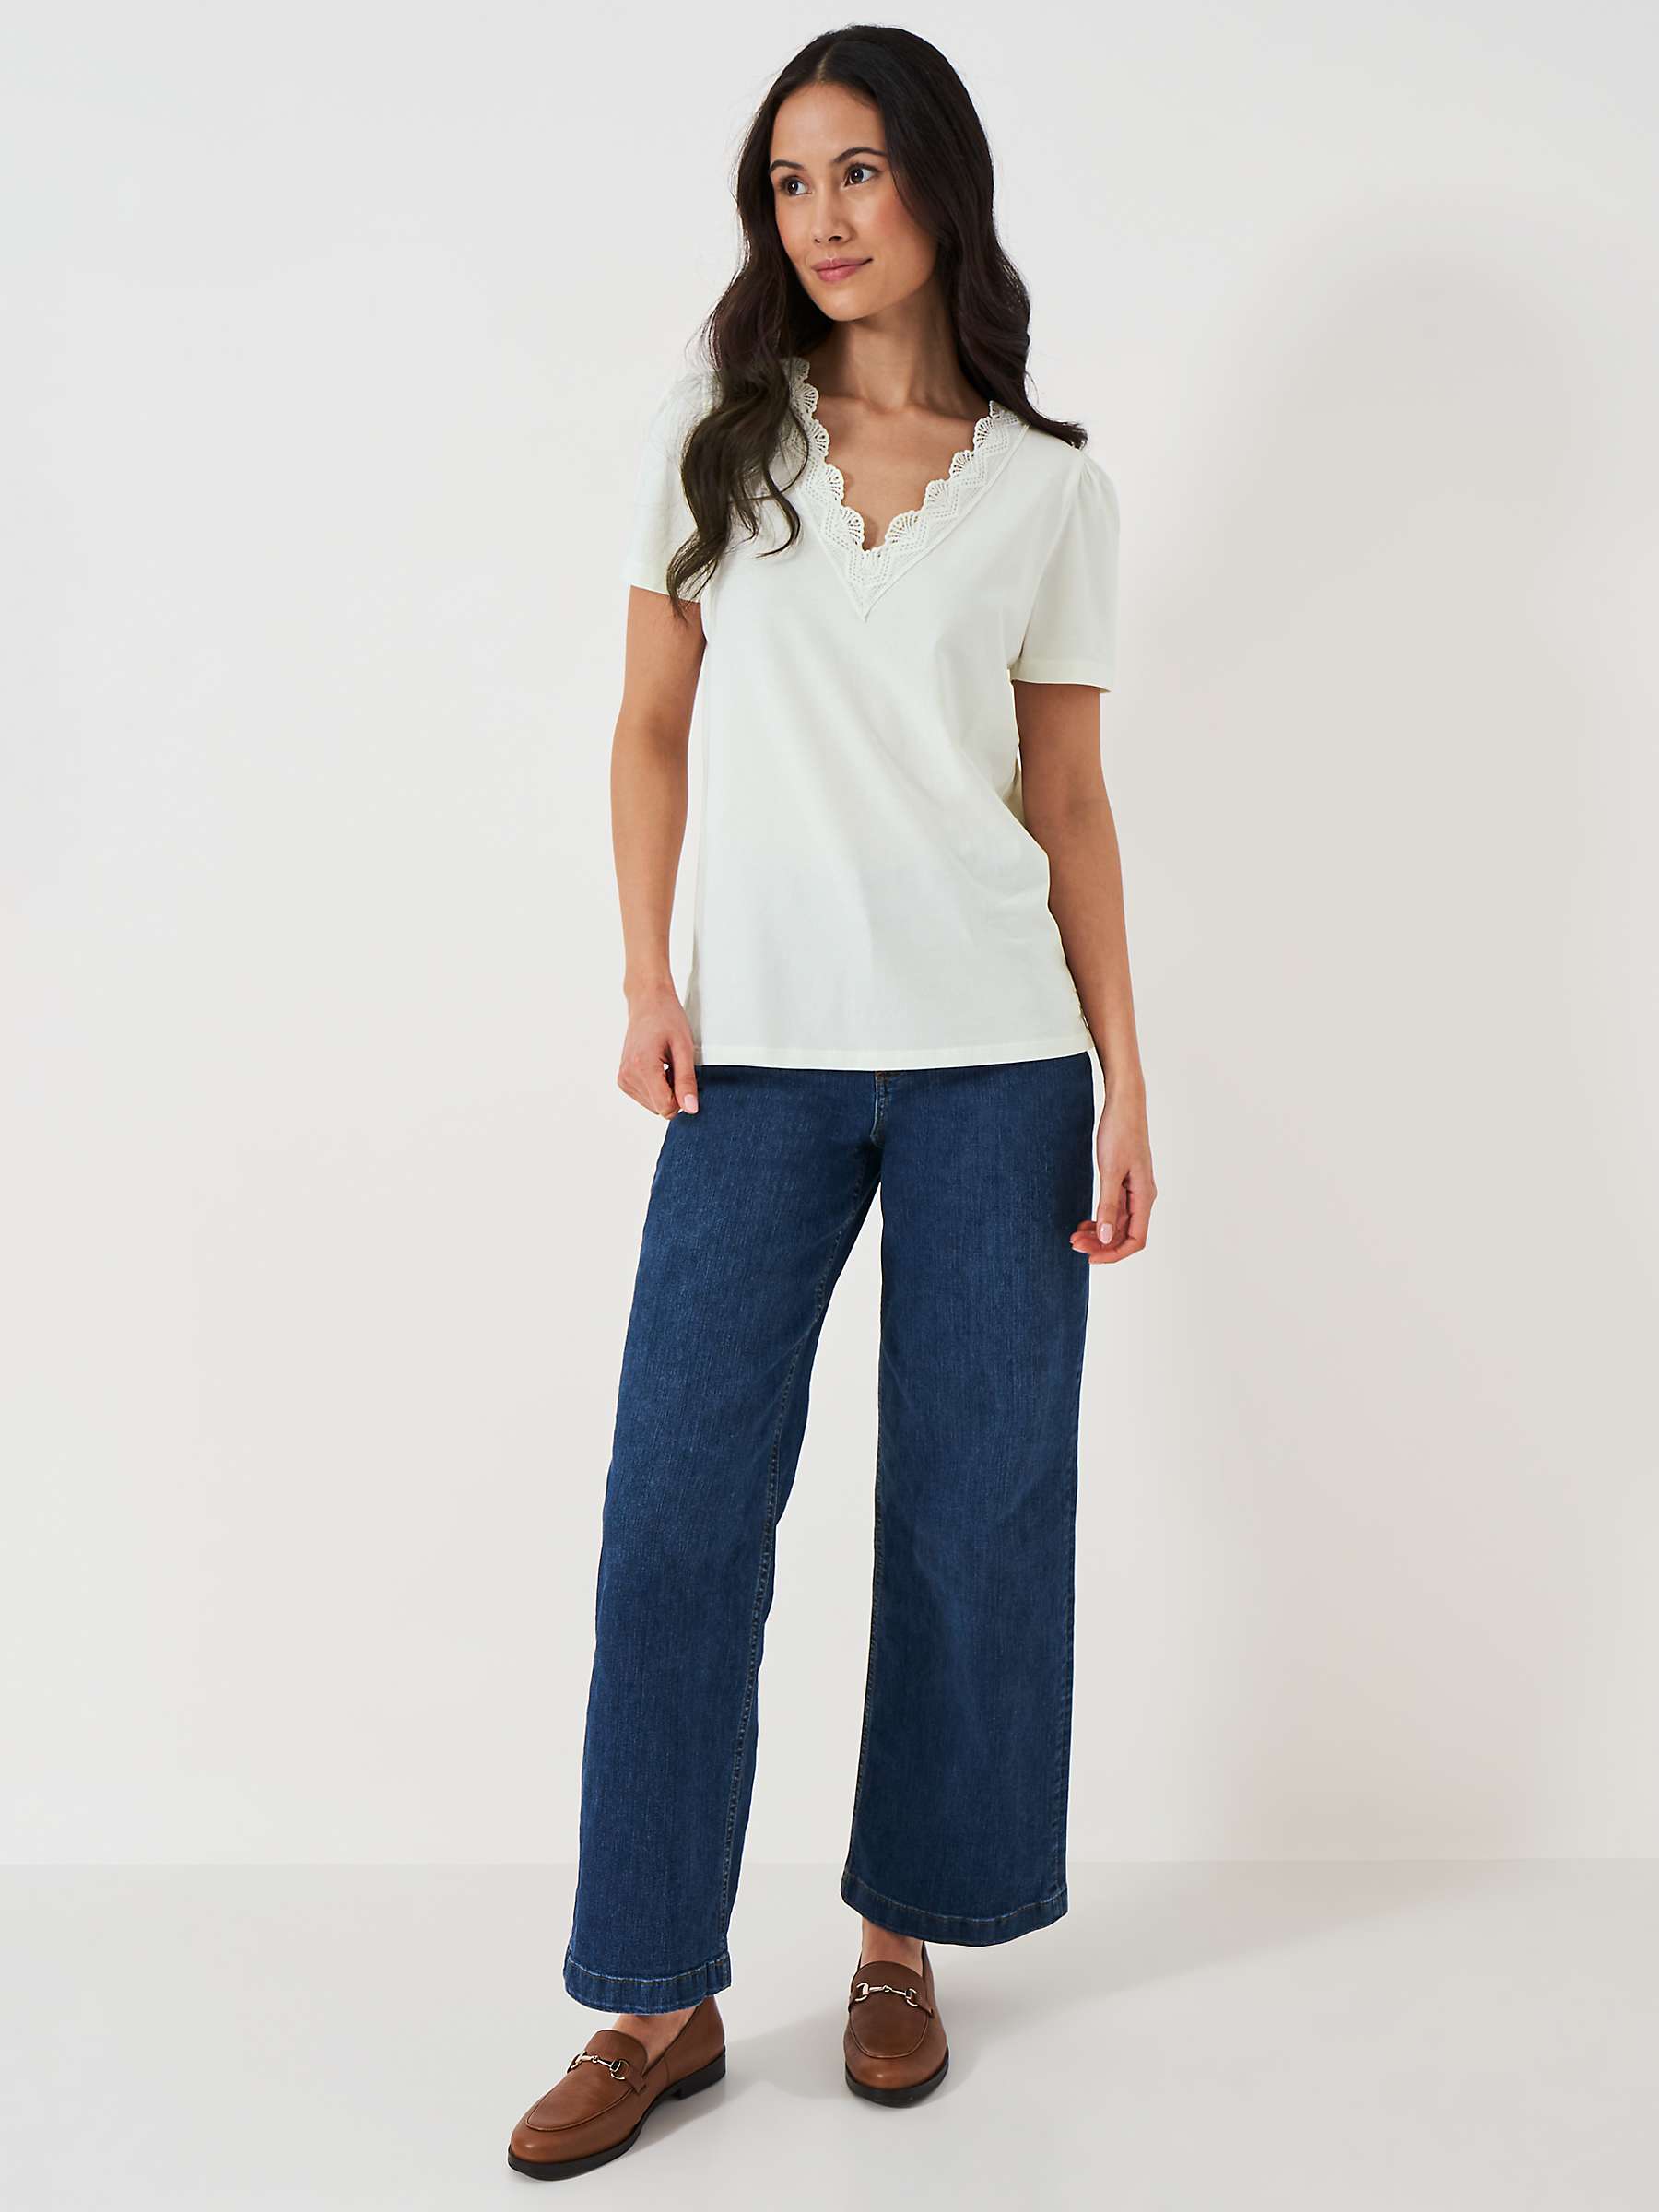 Buy Crew Clothing Lace Neck Short Sleeve Top, White Online at johnlewis.com